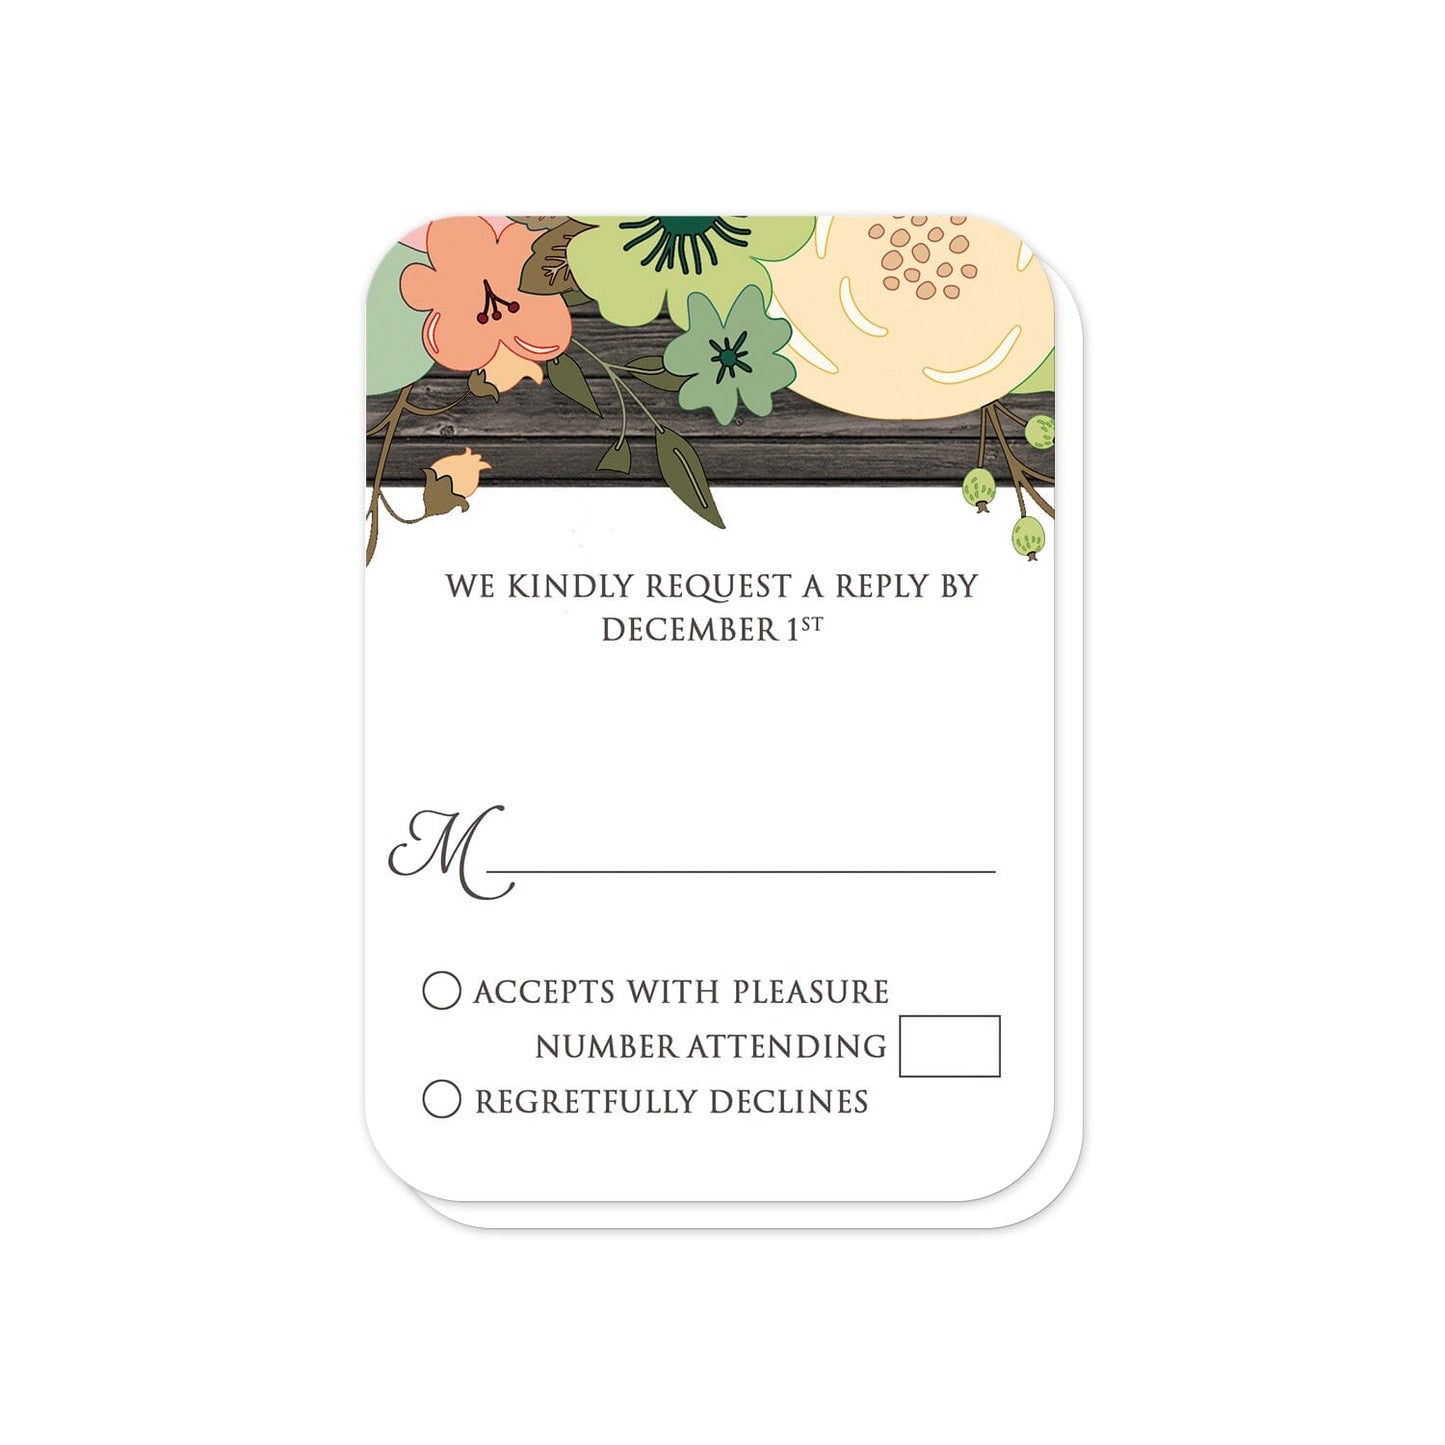 Rustic Orange Teal Floral Wood RSVP Cards (with rounded corners) at Artistically Invited.